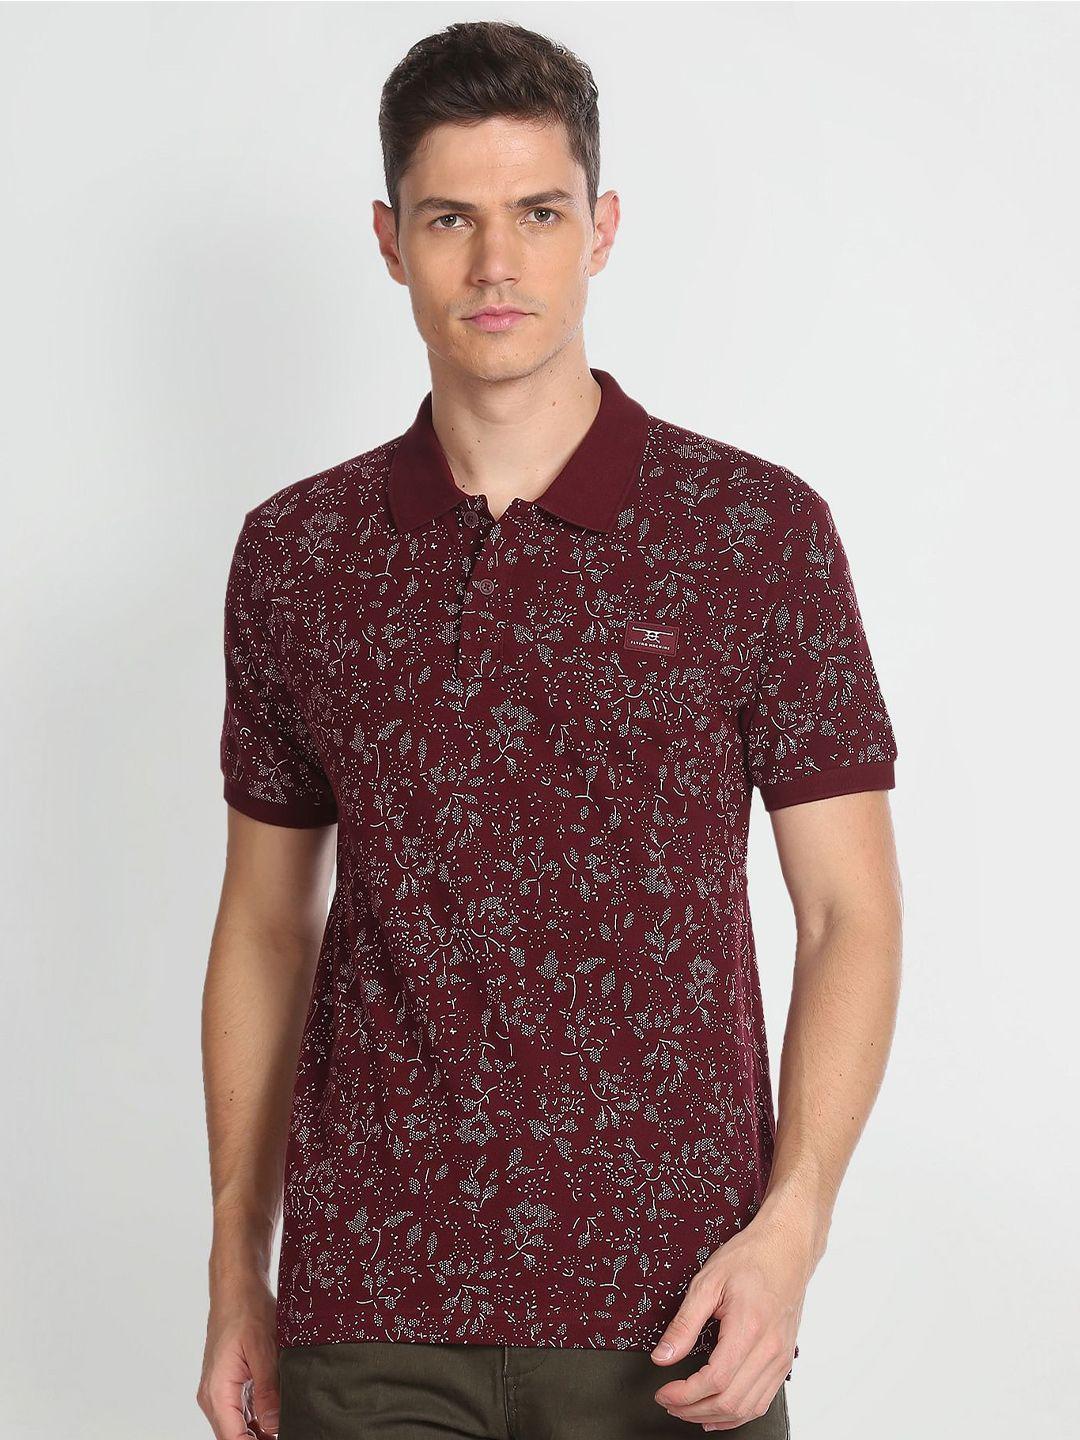 flying-machine-men-red-floral-printed-polo-collar-pockets-slim-fit-t-shirt